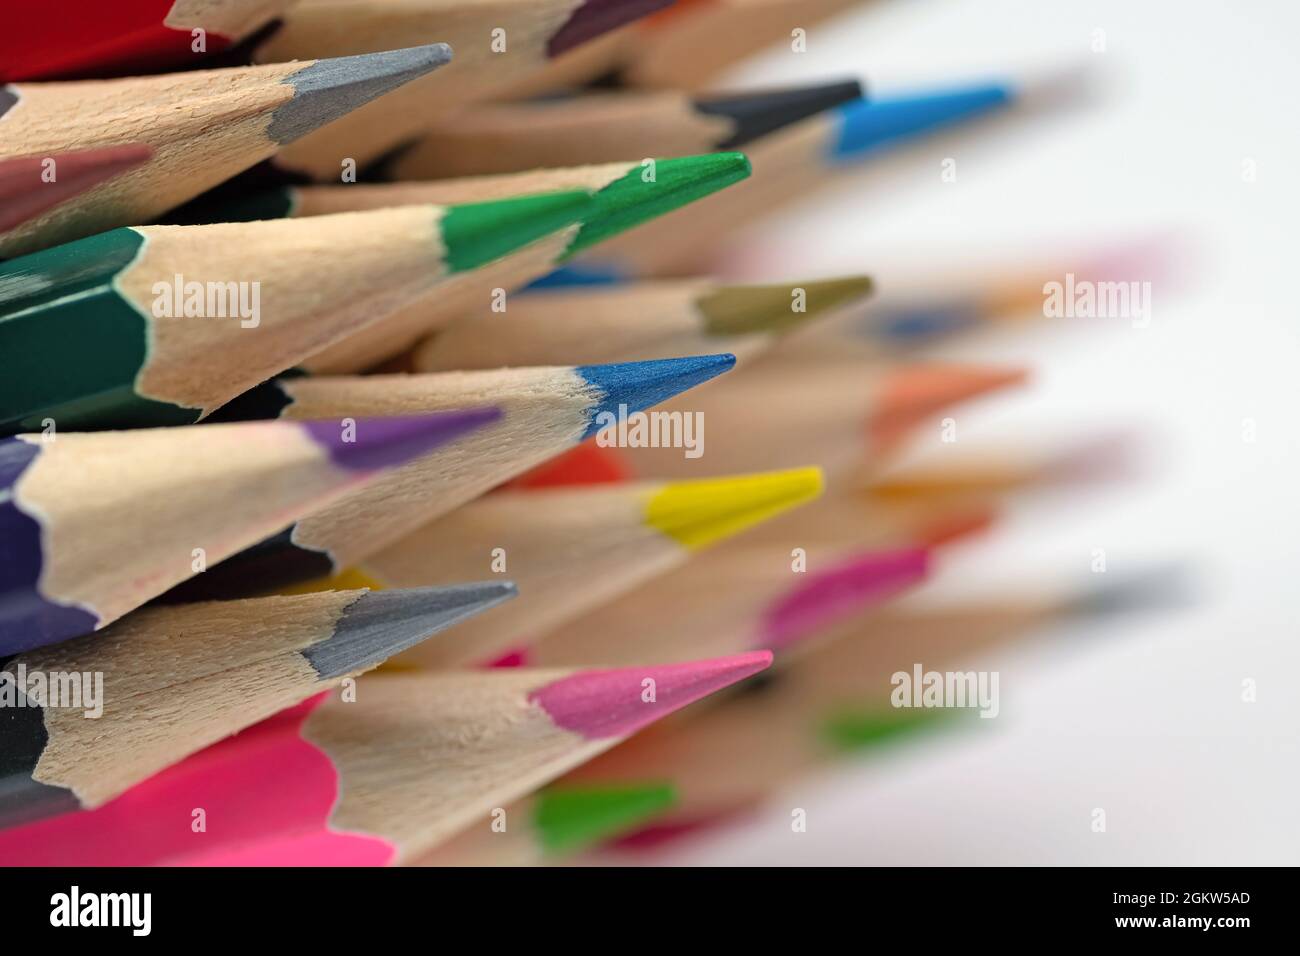 Lots of colored pencils in a close-up Stock Photo